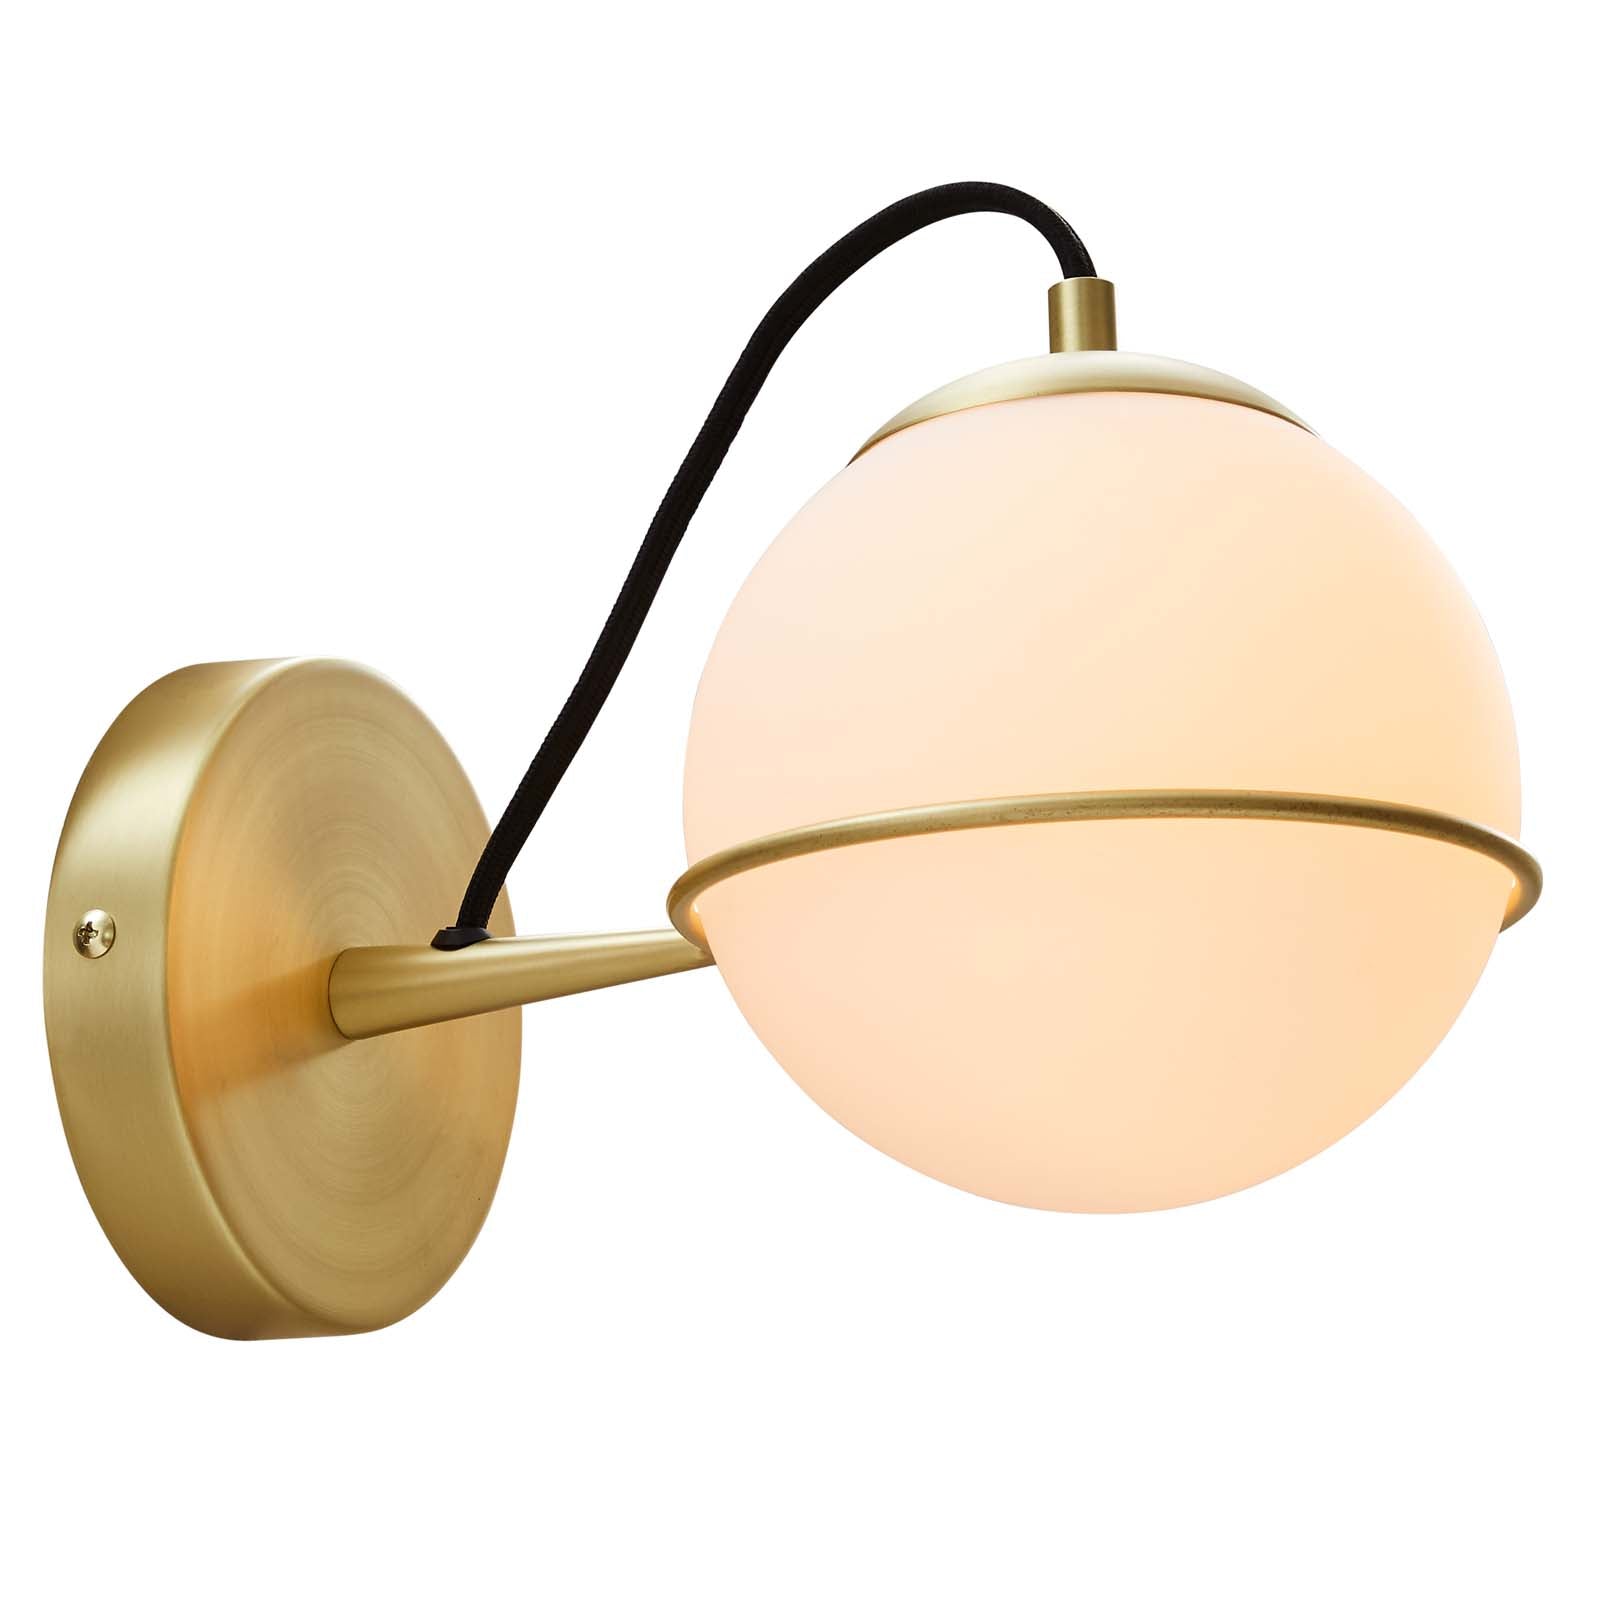 Modway Wall Sconces - Hanna Hardwire Wall Sconce Opal Gold